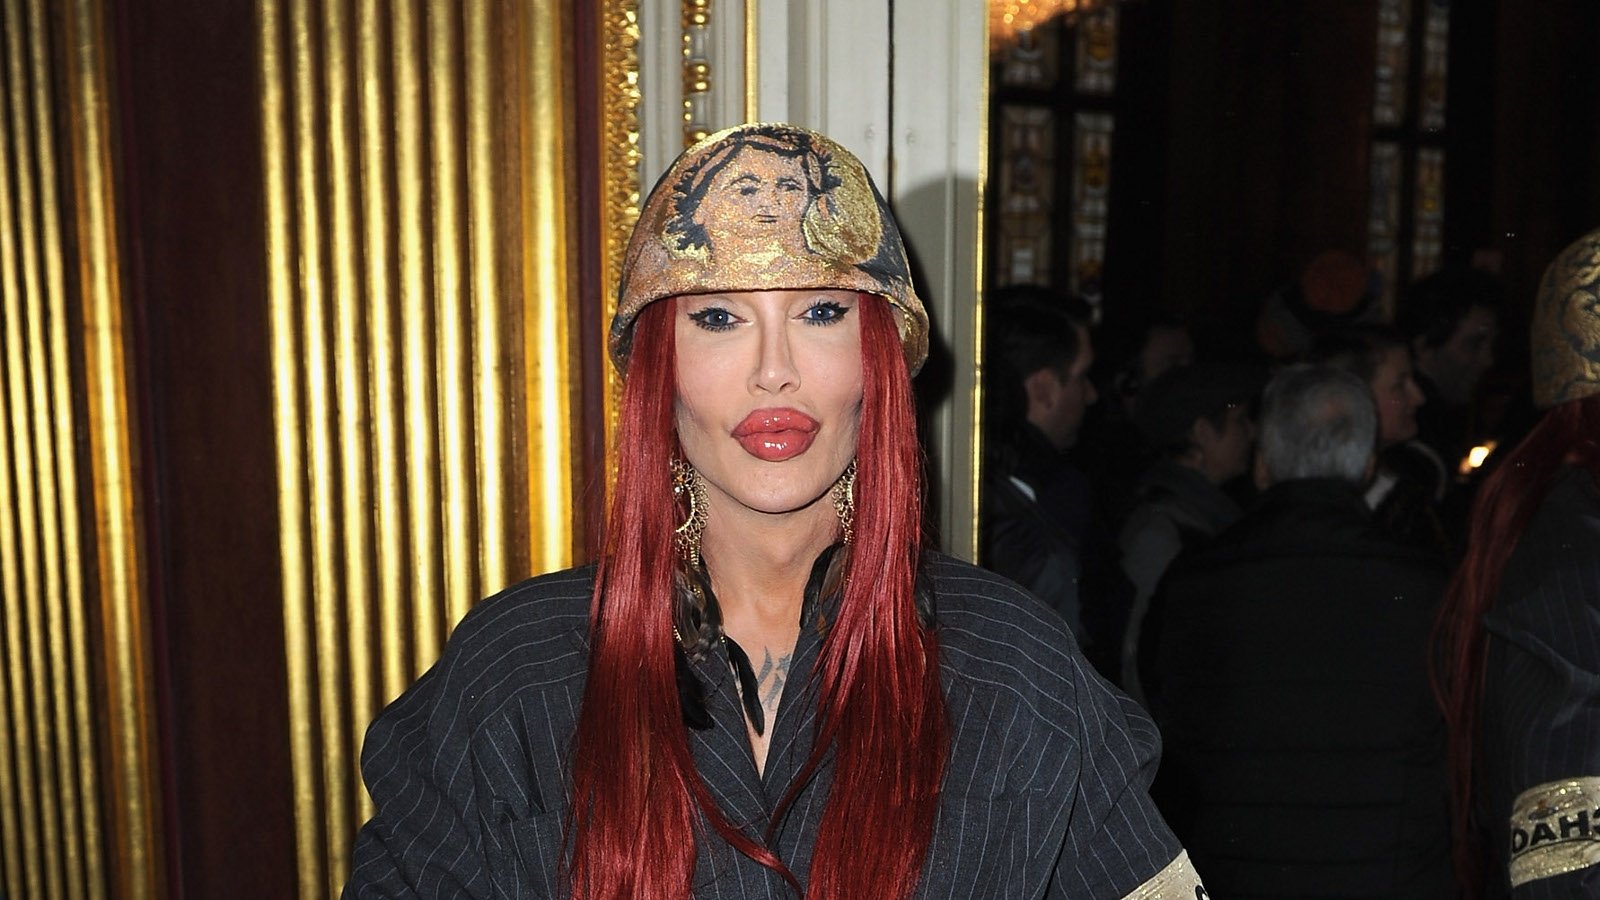 Singer and reality TV star Pete Burns dies aged 57